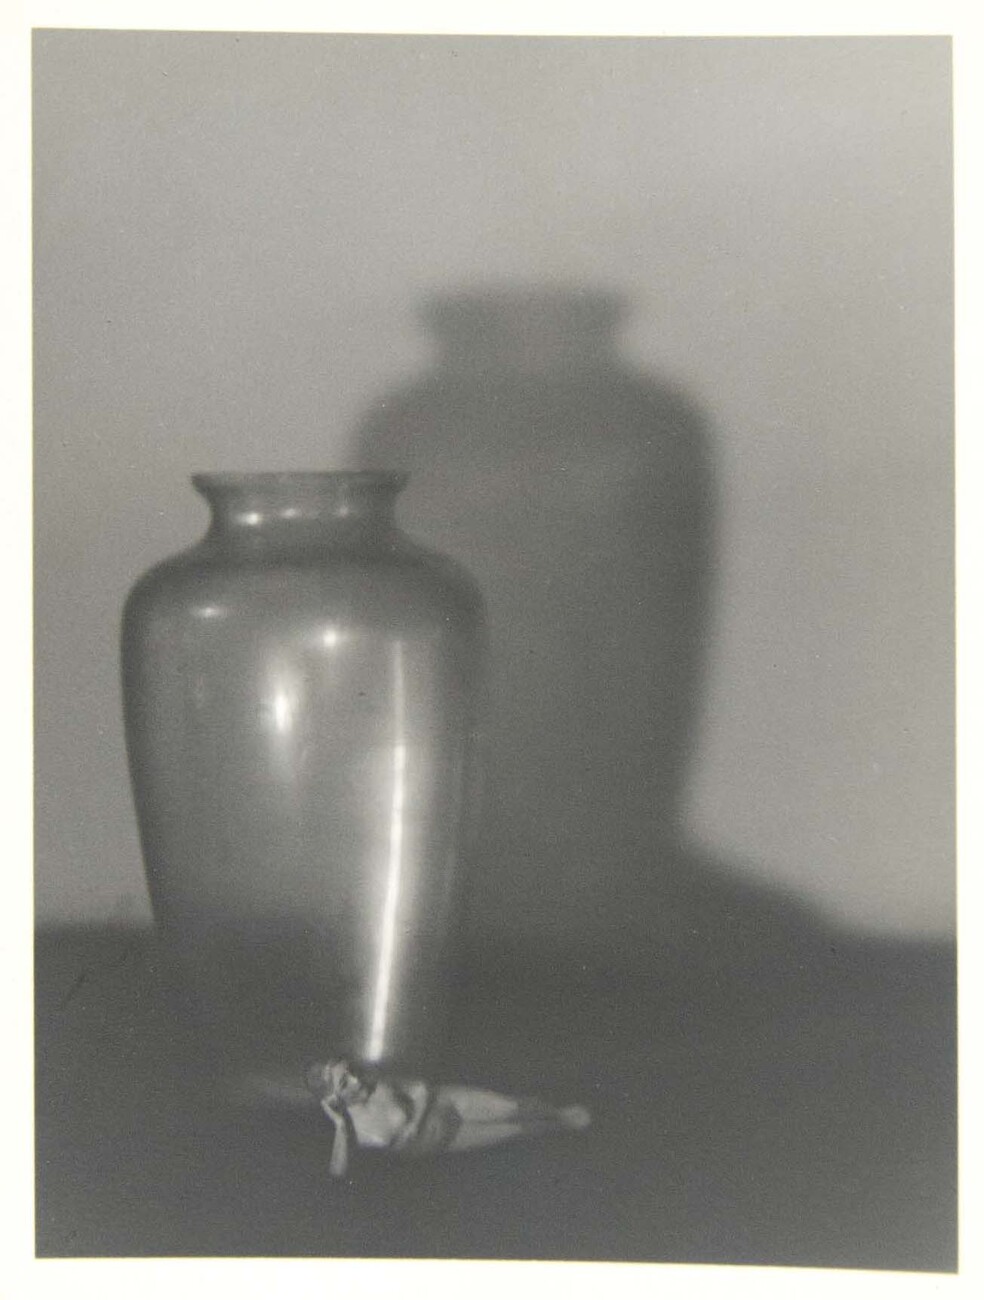 Black and white portrait of a vase and shadow with figurine adjacent to glass jar